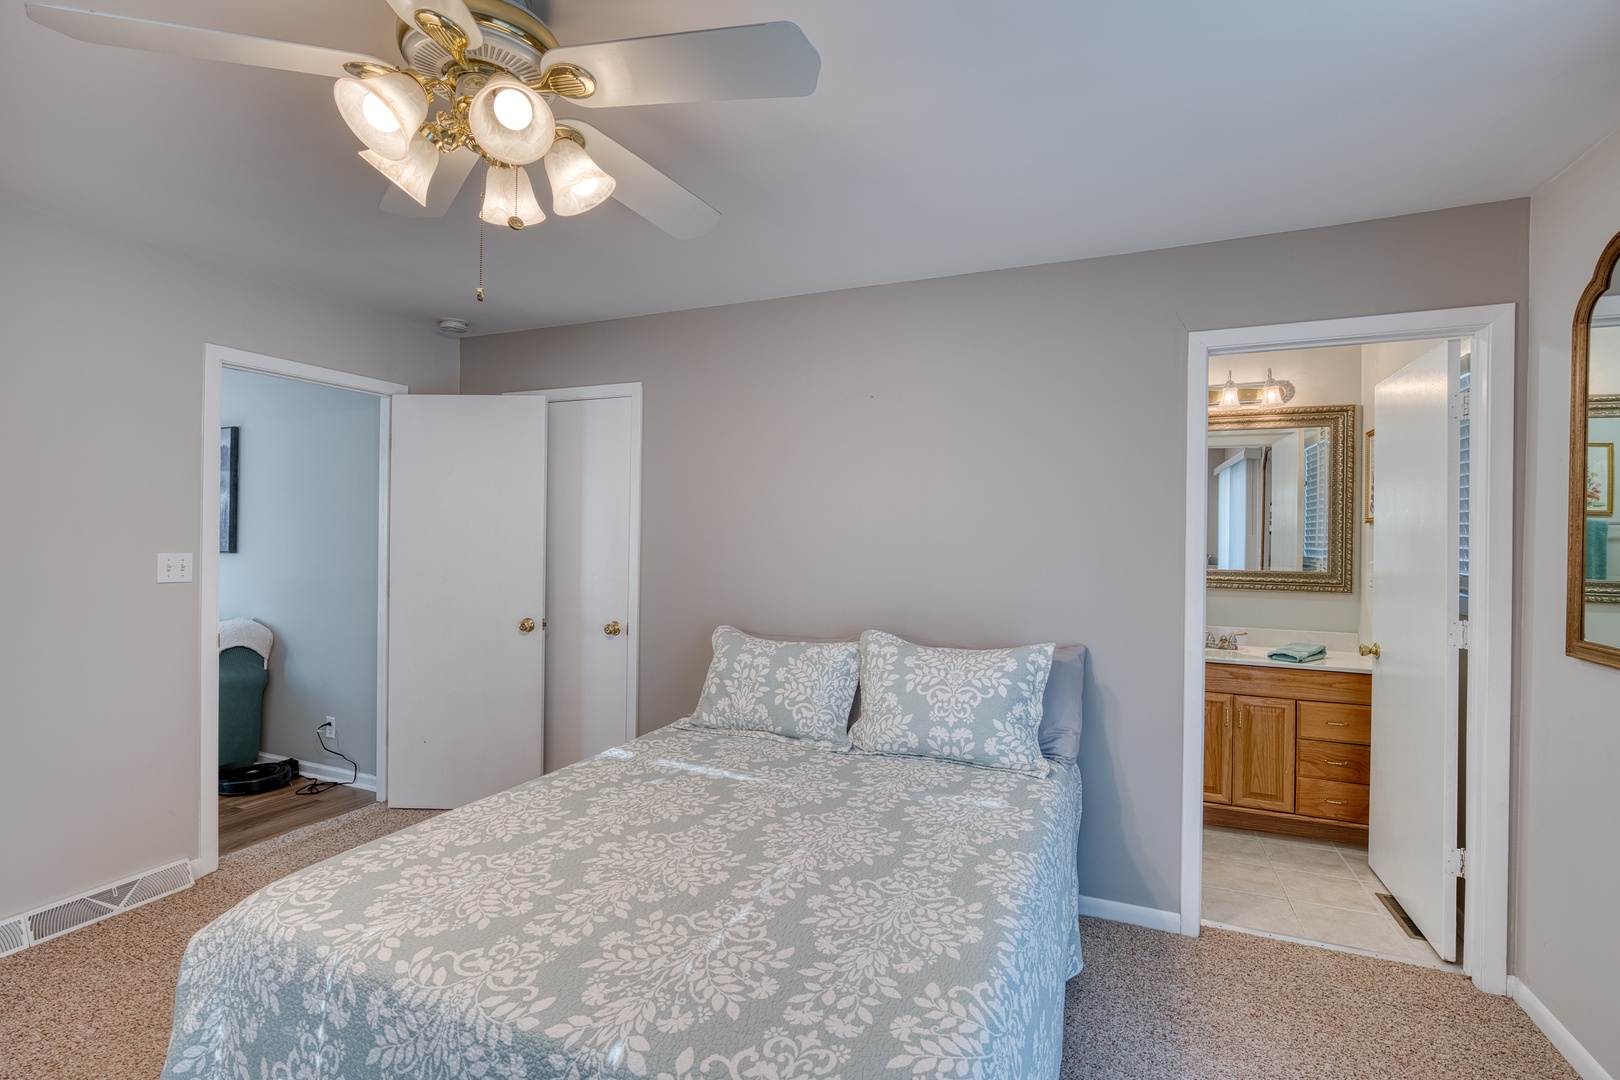 The tranquil queen suite boasts a private ensuite, Smart TV, & deck access